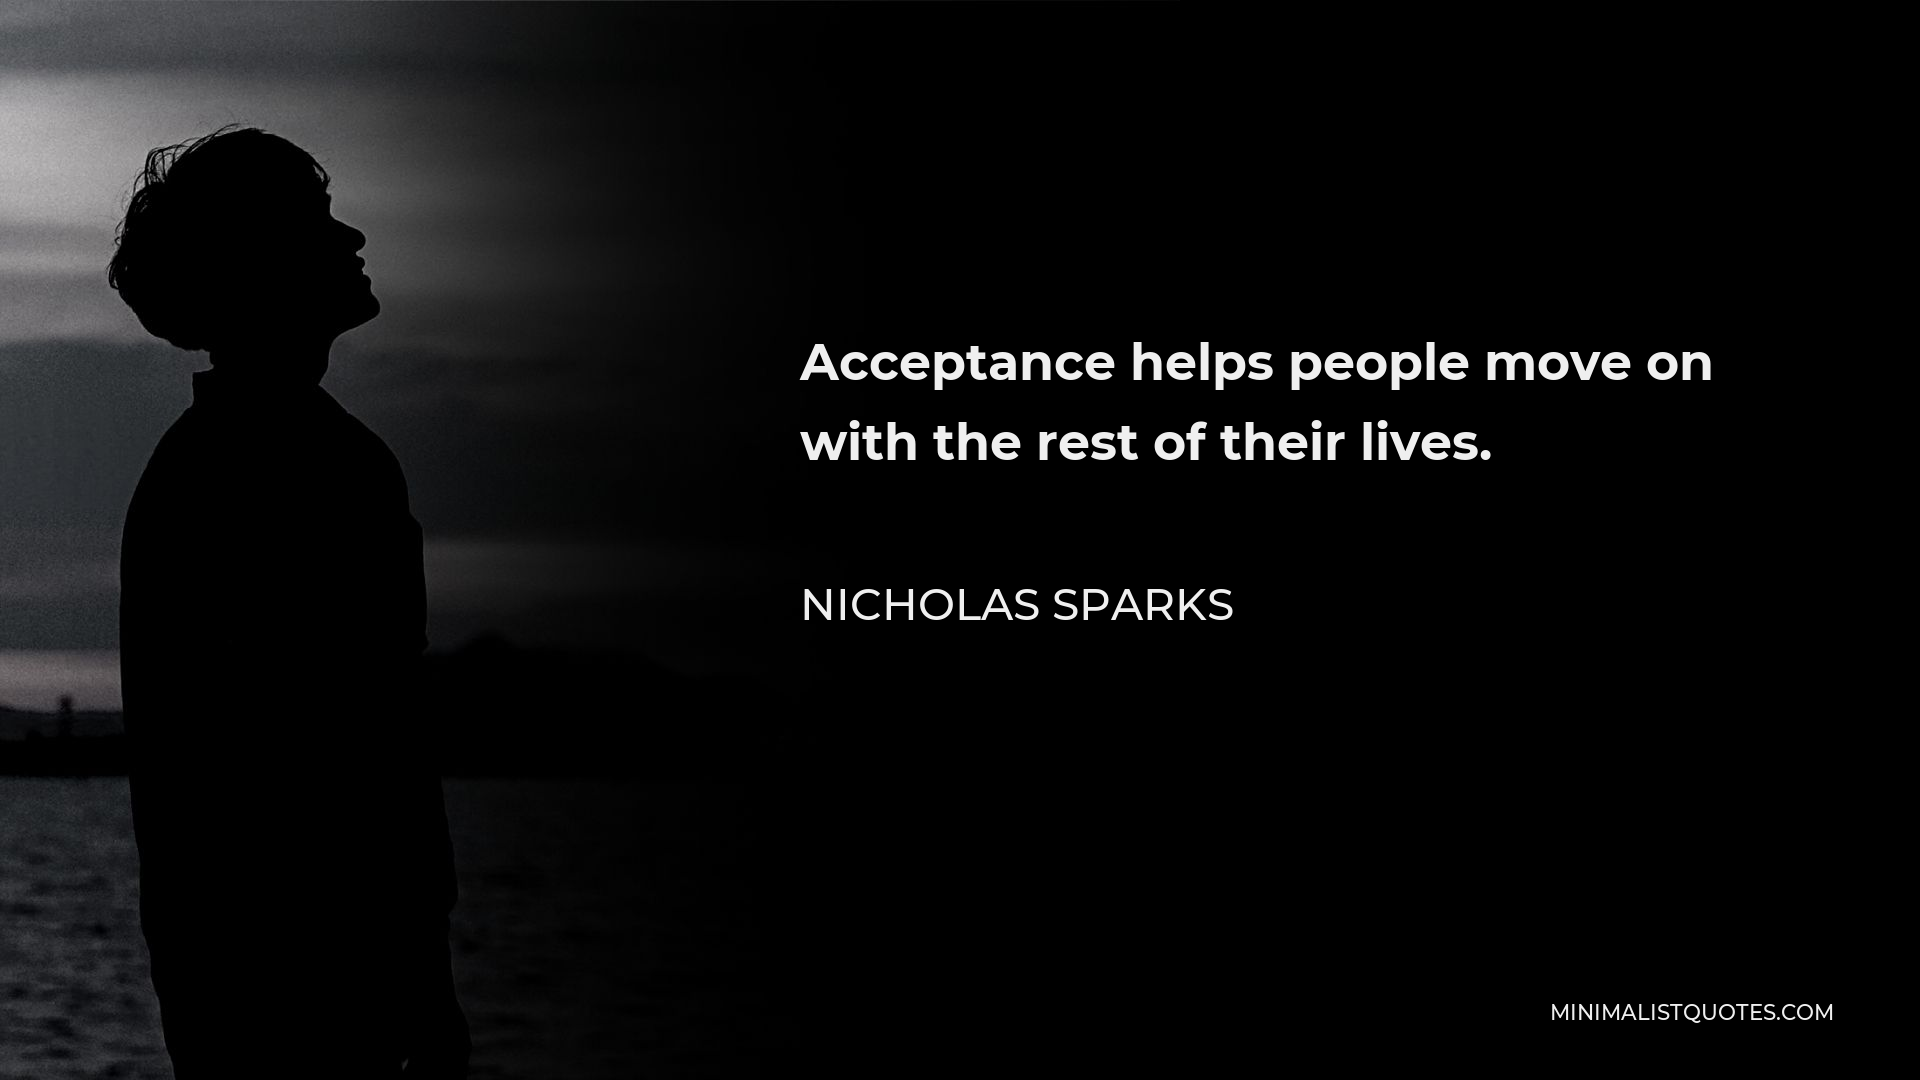 Nicholas Sparks Quote - Acceptance helps people move on with the rest of their lives.